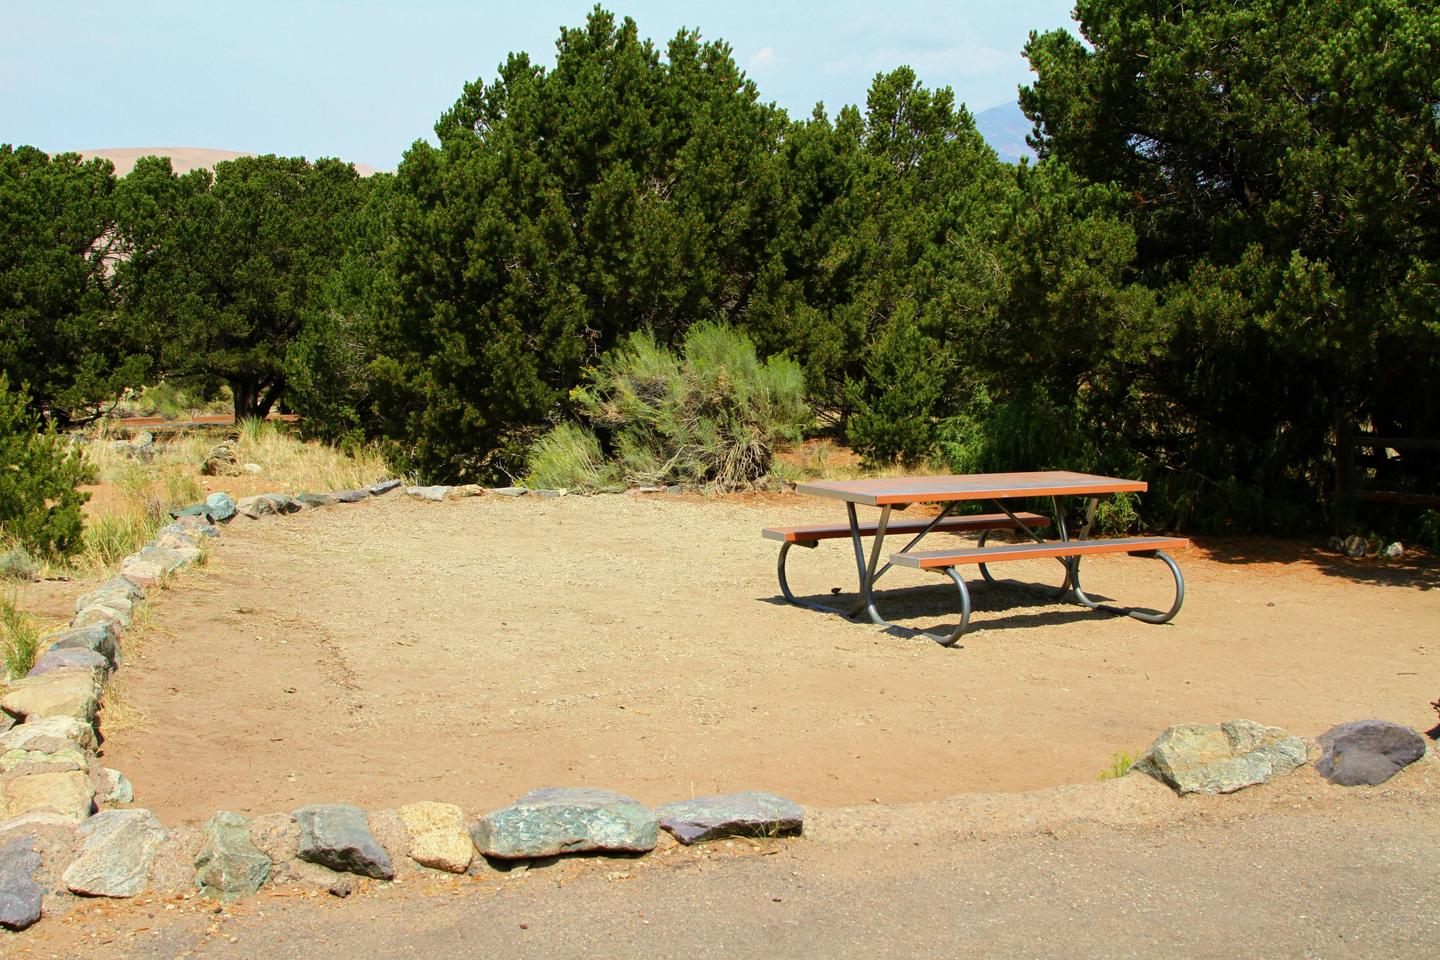 Closer view of Site #57 tent pad with picnic table. Site has pine trees on one side of boundary and is ringed by a low rock border.Site #57, Pinon Flats Campground